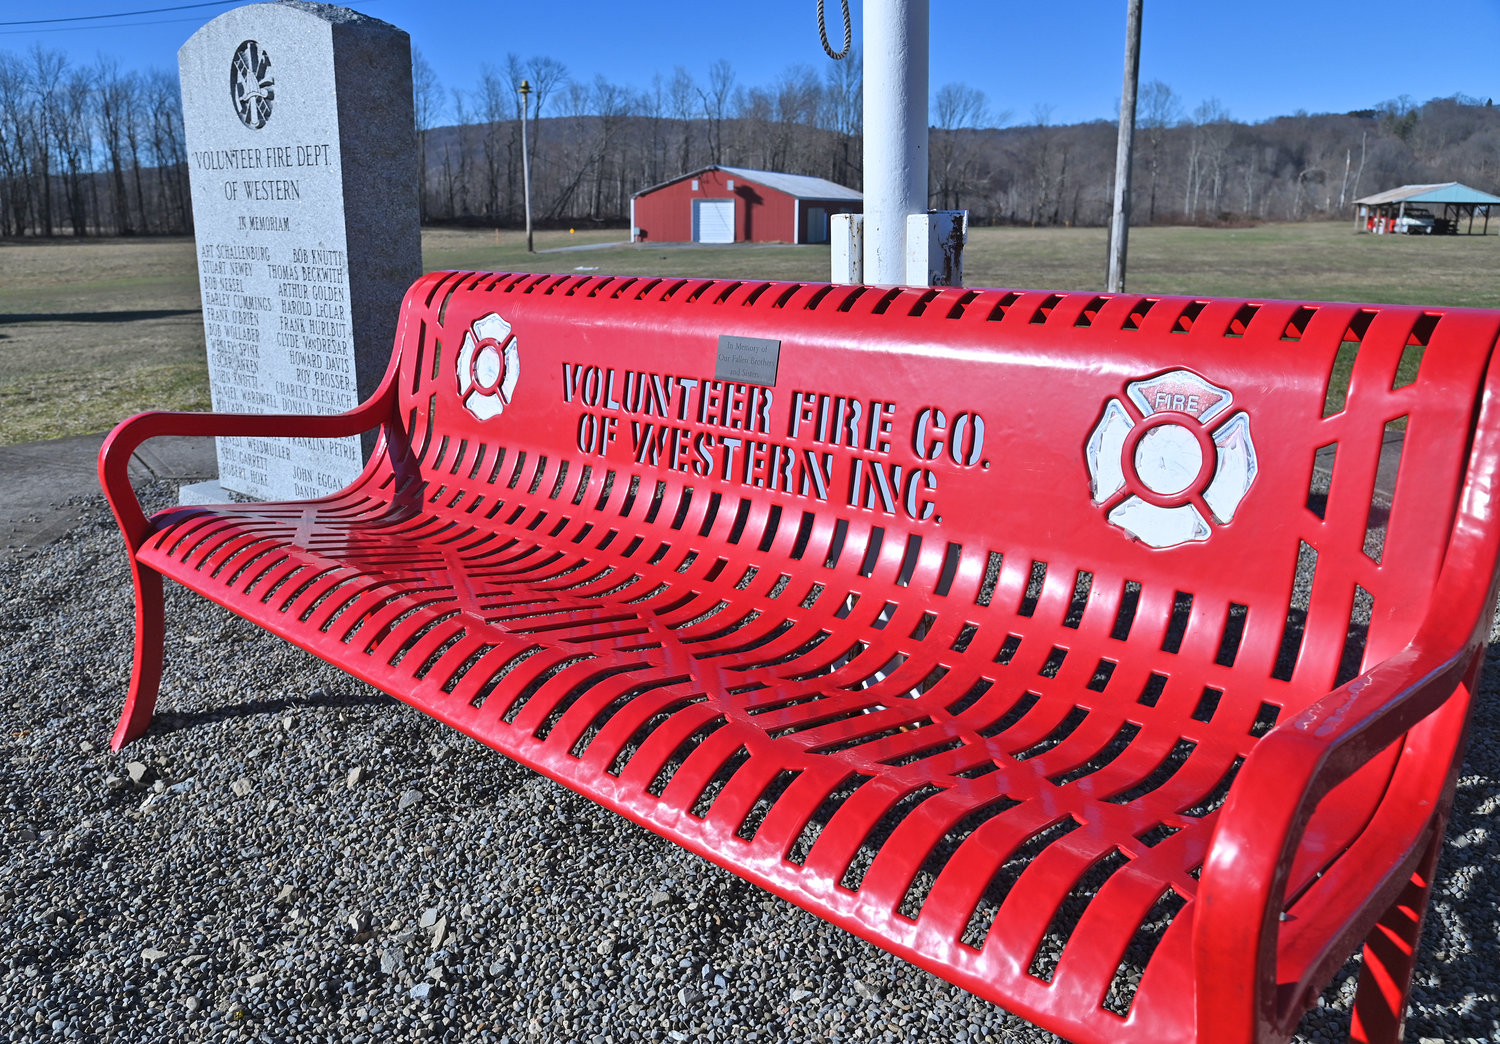 A bright red bench outside the Volunteer Fire Co. of Western’s fire house greets visitors to the Route 46 faciltiy, just north of the hamlet of Westernville. Local fire company officials across the region say they would welcome state efforts to assist in the recruitment and retention of volunteers.